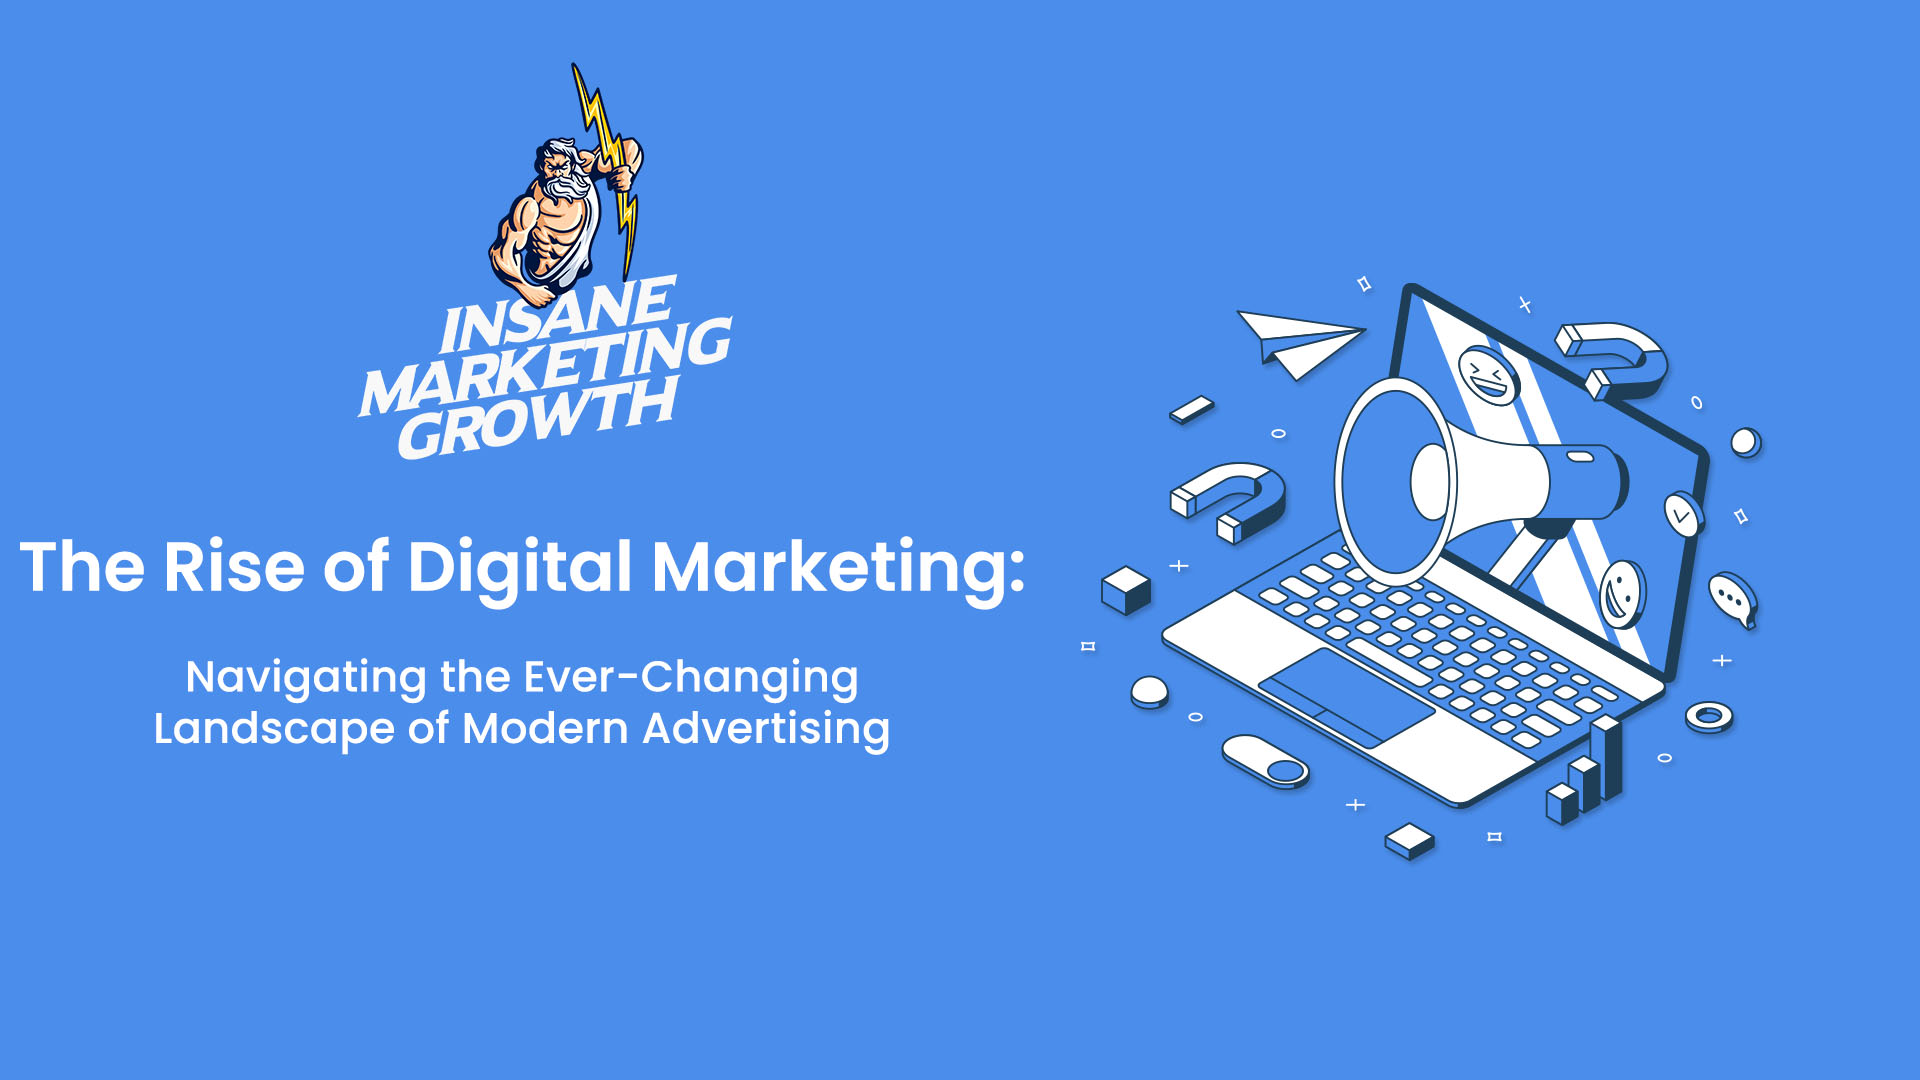 The Rise of Digital Marketing: Navigating the Ever-Changing Landscape of Modern Advertising